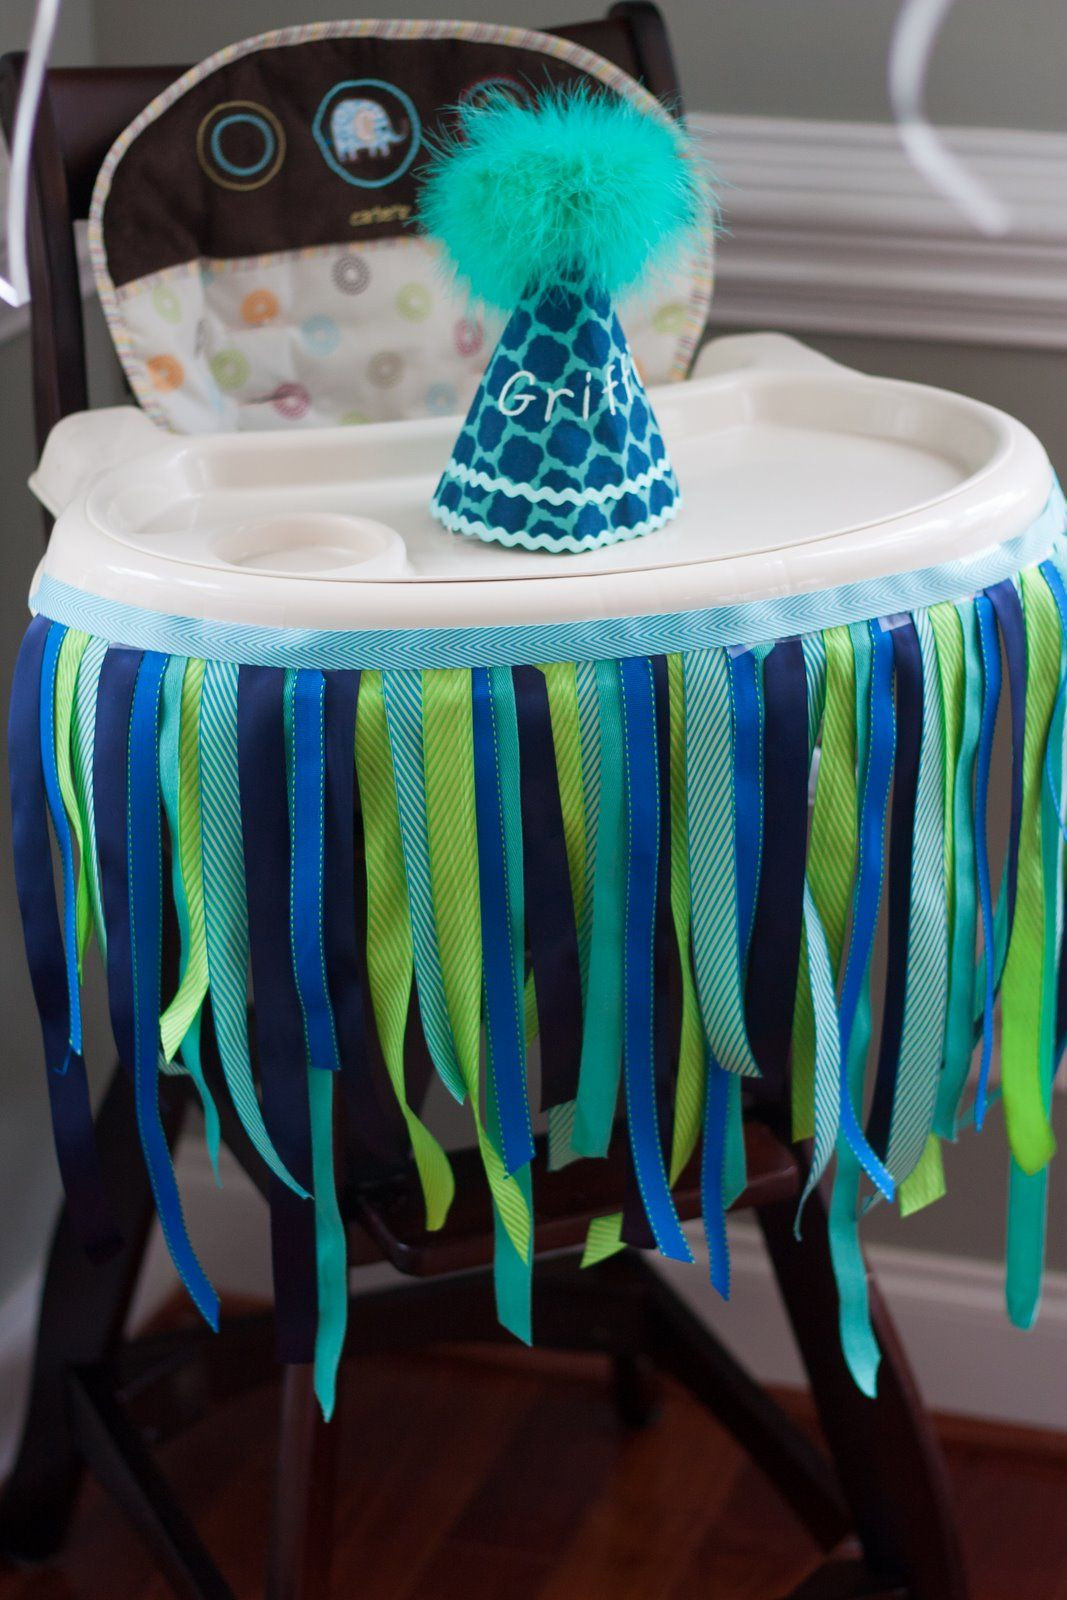 High Chair Birthday Decorations
 Decorated high chair with ribbon and custom birthday party